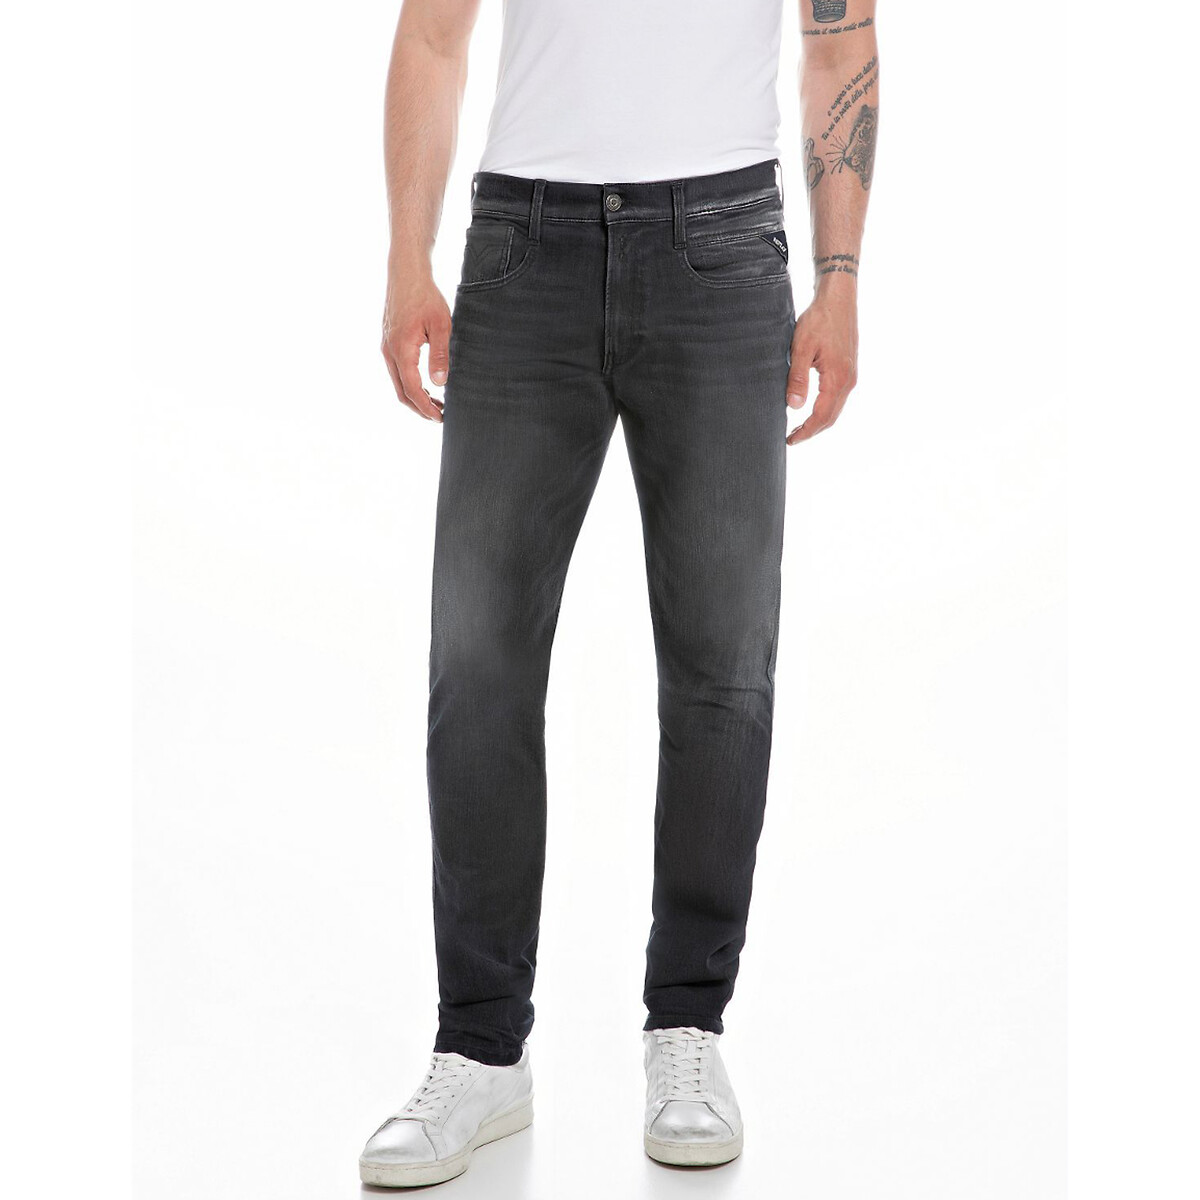 Jeans Anbass, Slim-Fit von Replay